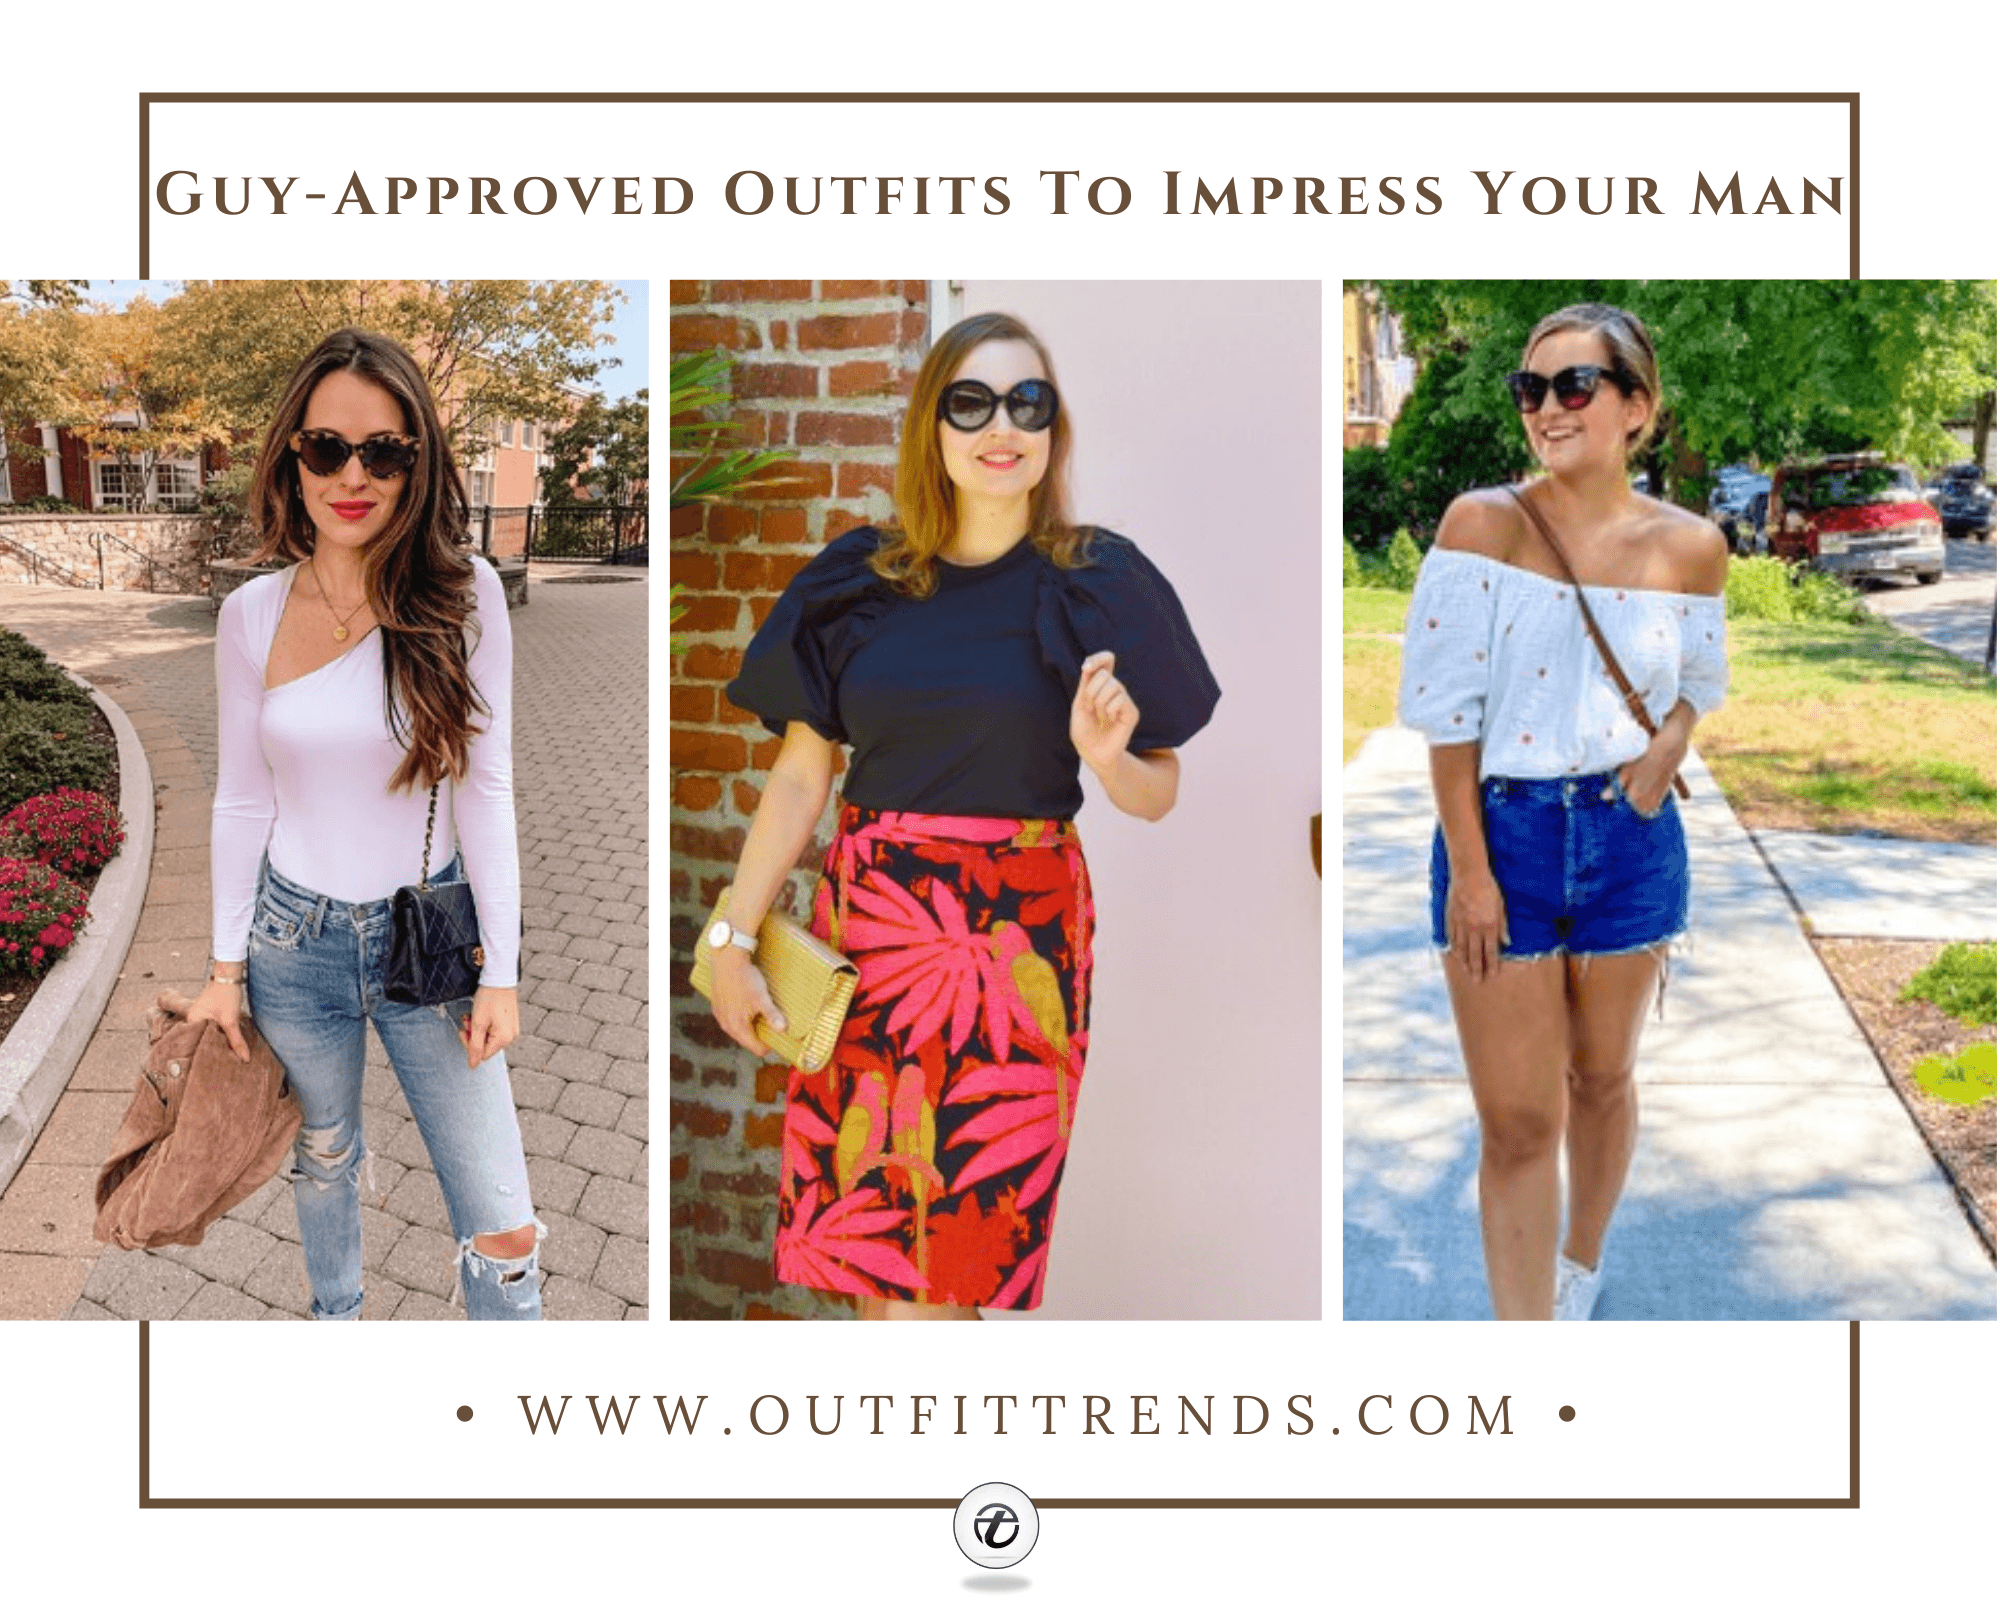 Outfits Men Love on Women – 20 Outfits He Wants you to Wear